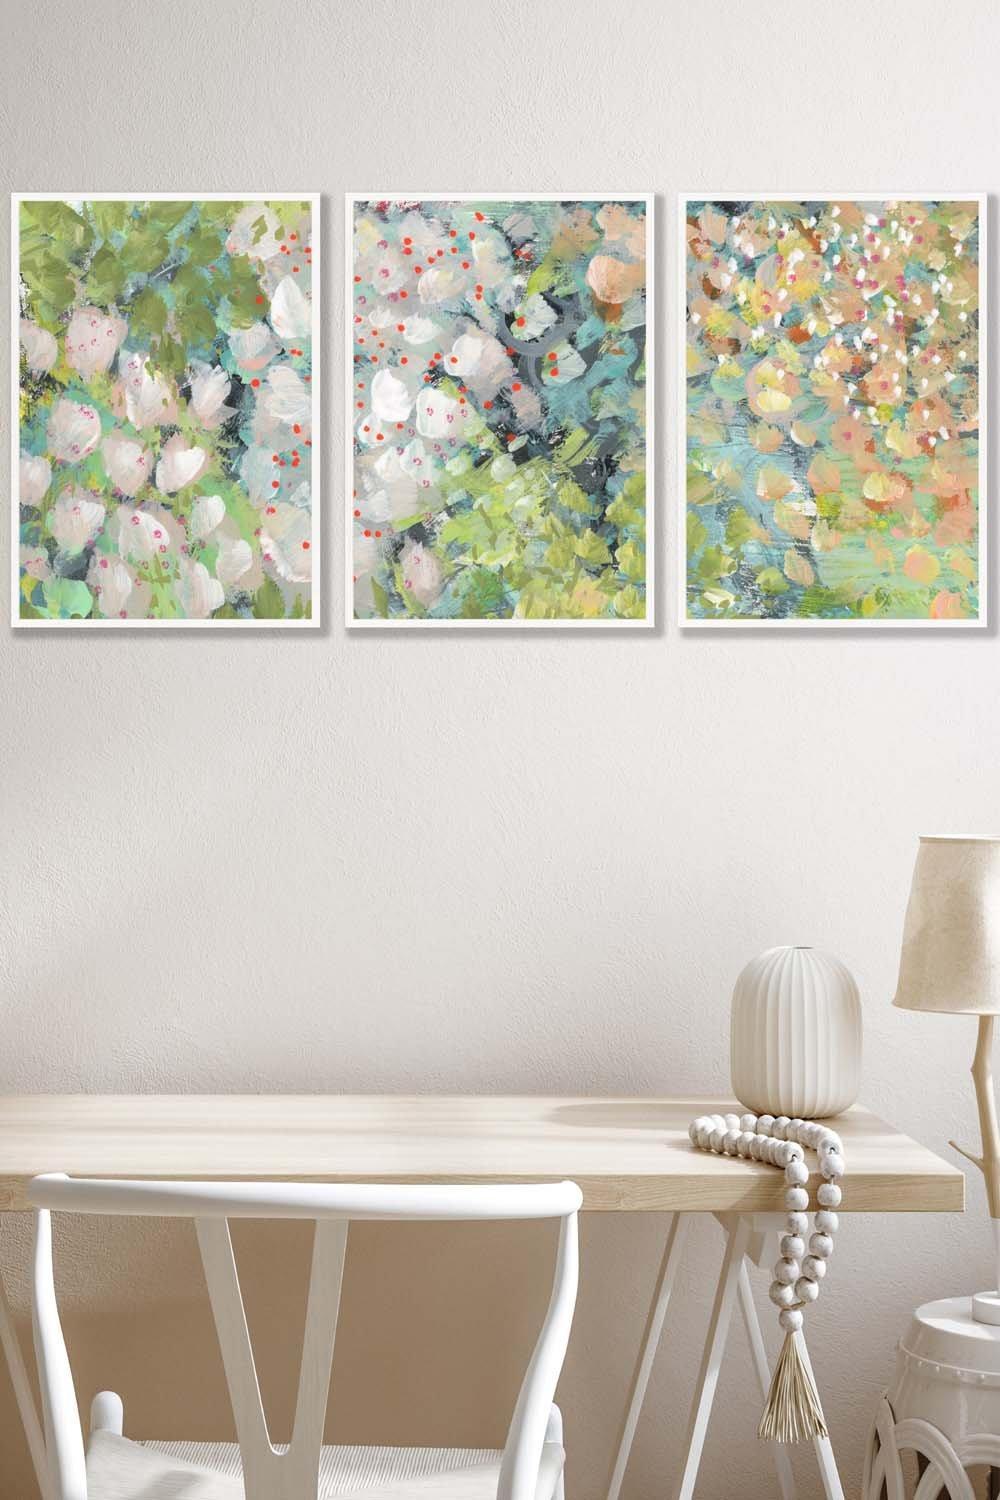 Set of 3 White Framed Abstract Cottage Garden Flowers in Green Wall Art